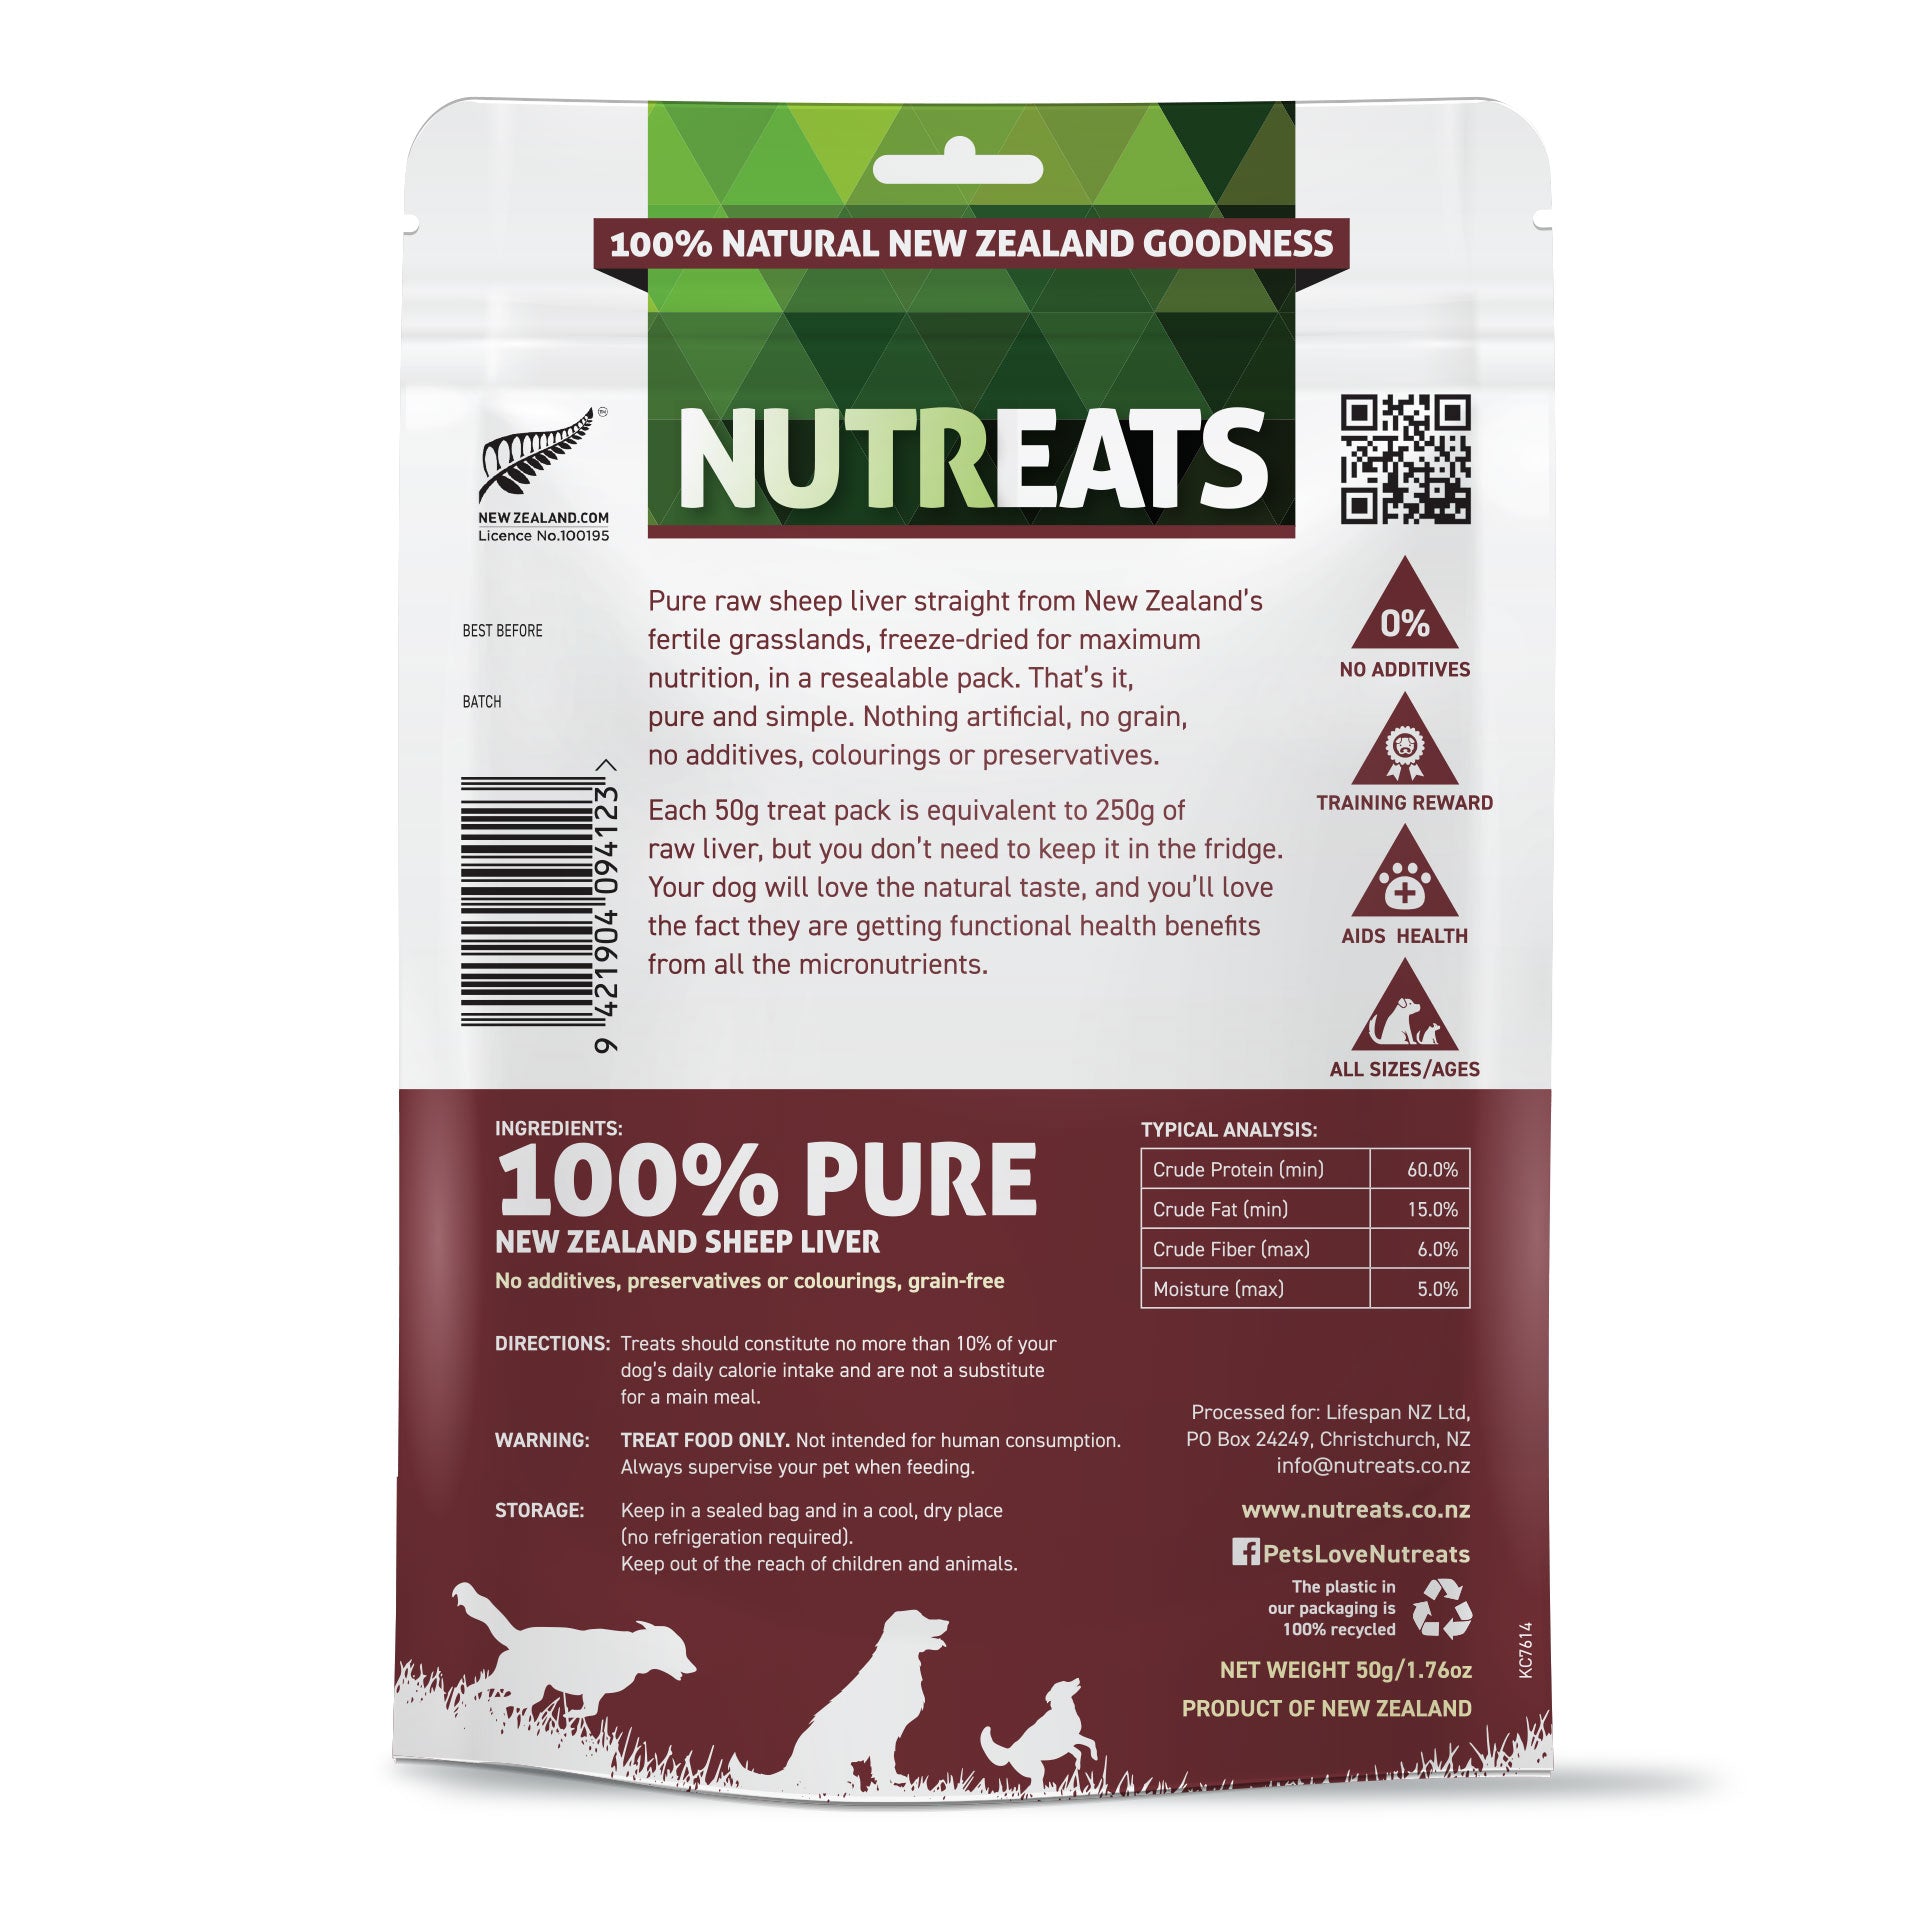 Nutreats New Zealand sheep liver dog treats. Protein rich dog training treats. Totally natural nutrient supplement treats supporting anti-inflammatory reactions and rich in vitamin an and Iron. Pure meat treat for dogs. Not additives training reward. Aids health and suitable for dogs of all ages and sizes. 50g freeze dried equivalent to 250g raw liver.